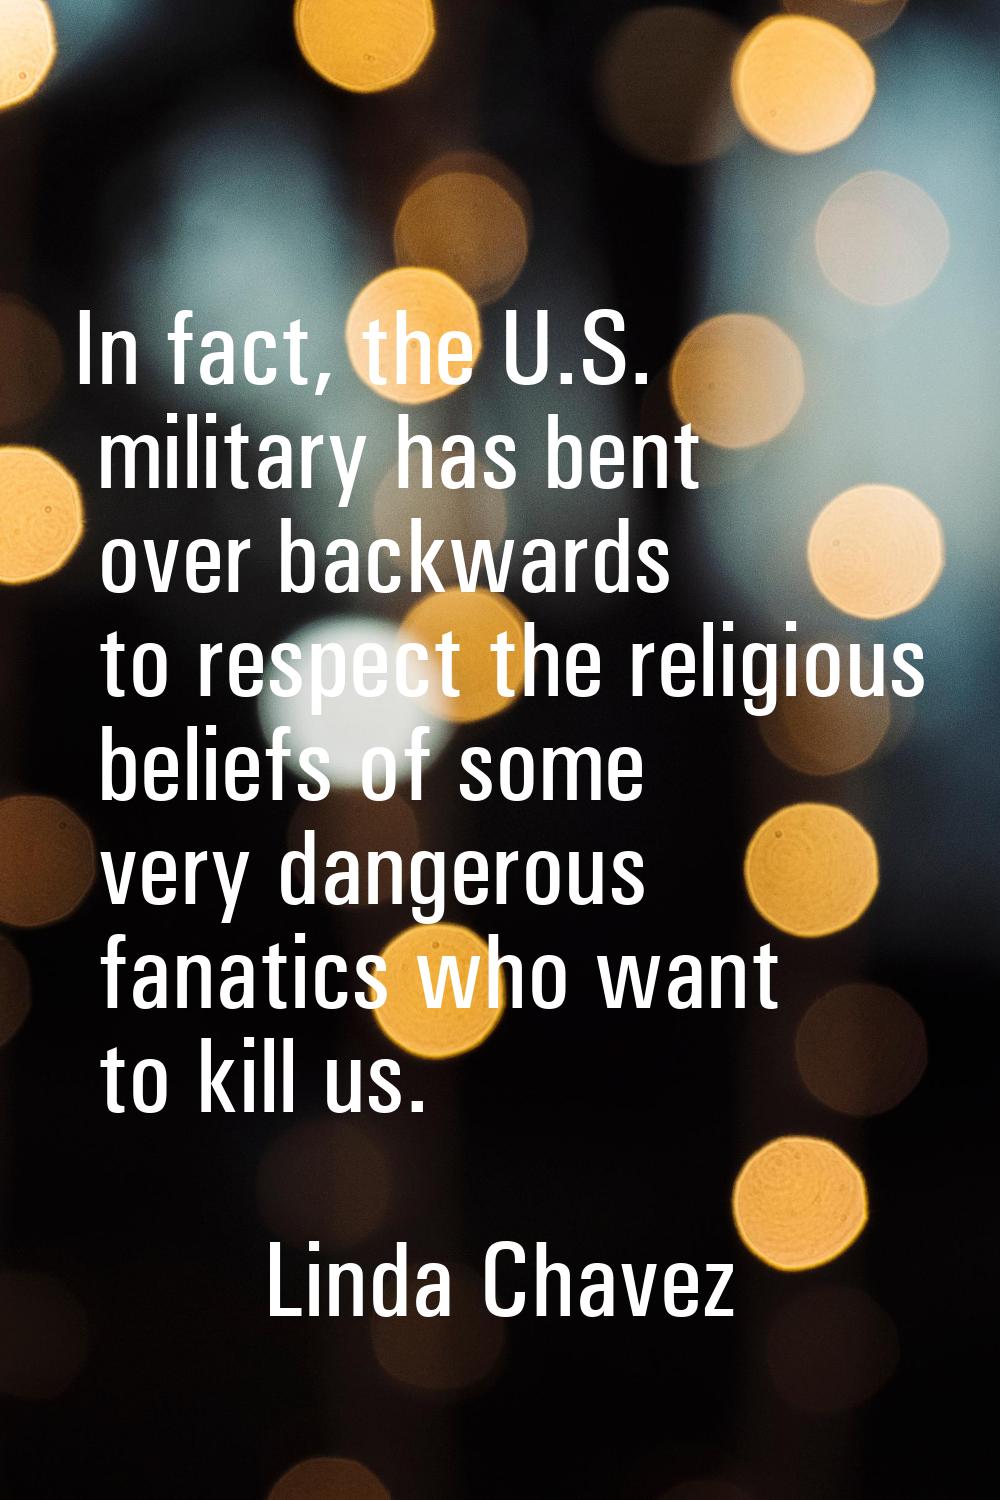 In fact, the U.S. military has bent over backwards to respect the religious beliefs of some very da